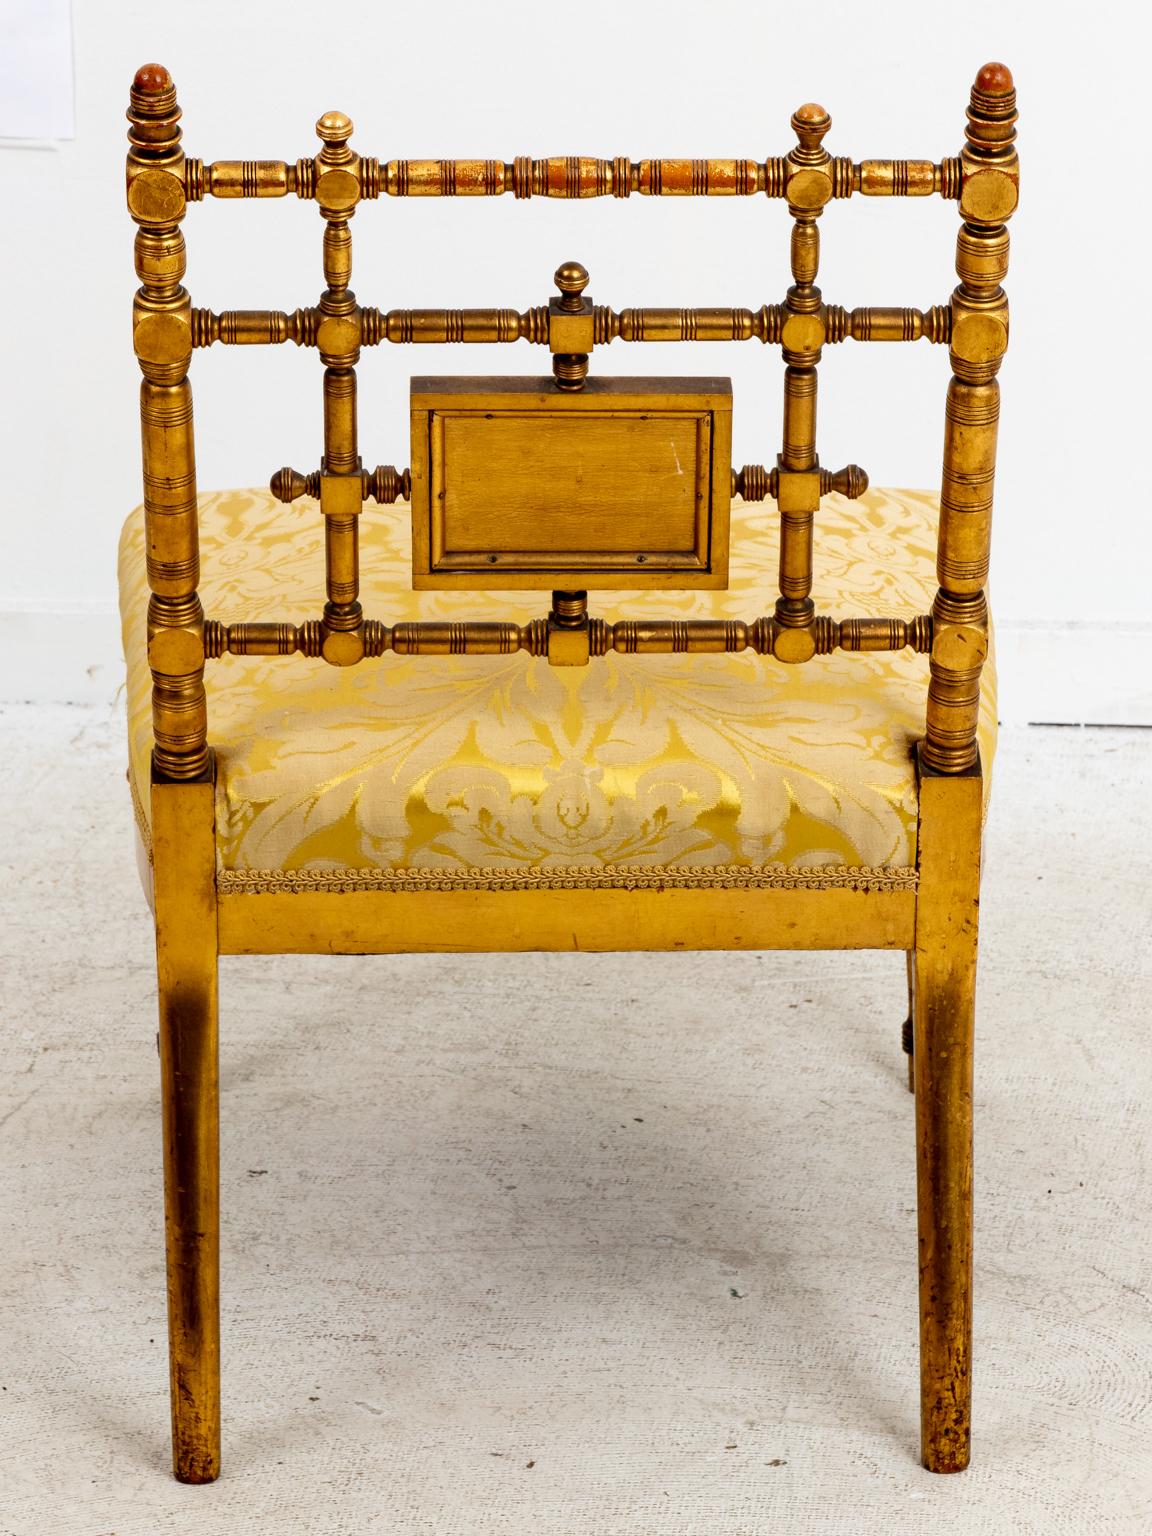 Victorian Eastlake style giltwood slipper chair with painted floral illustrated panel on the seat back and an upholstered seat, circa 19th century. The piece also features ring turned wood throughout. Please note of wear consistent with age